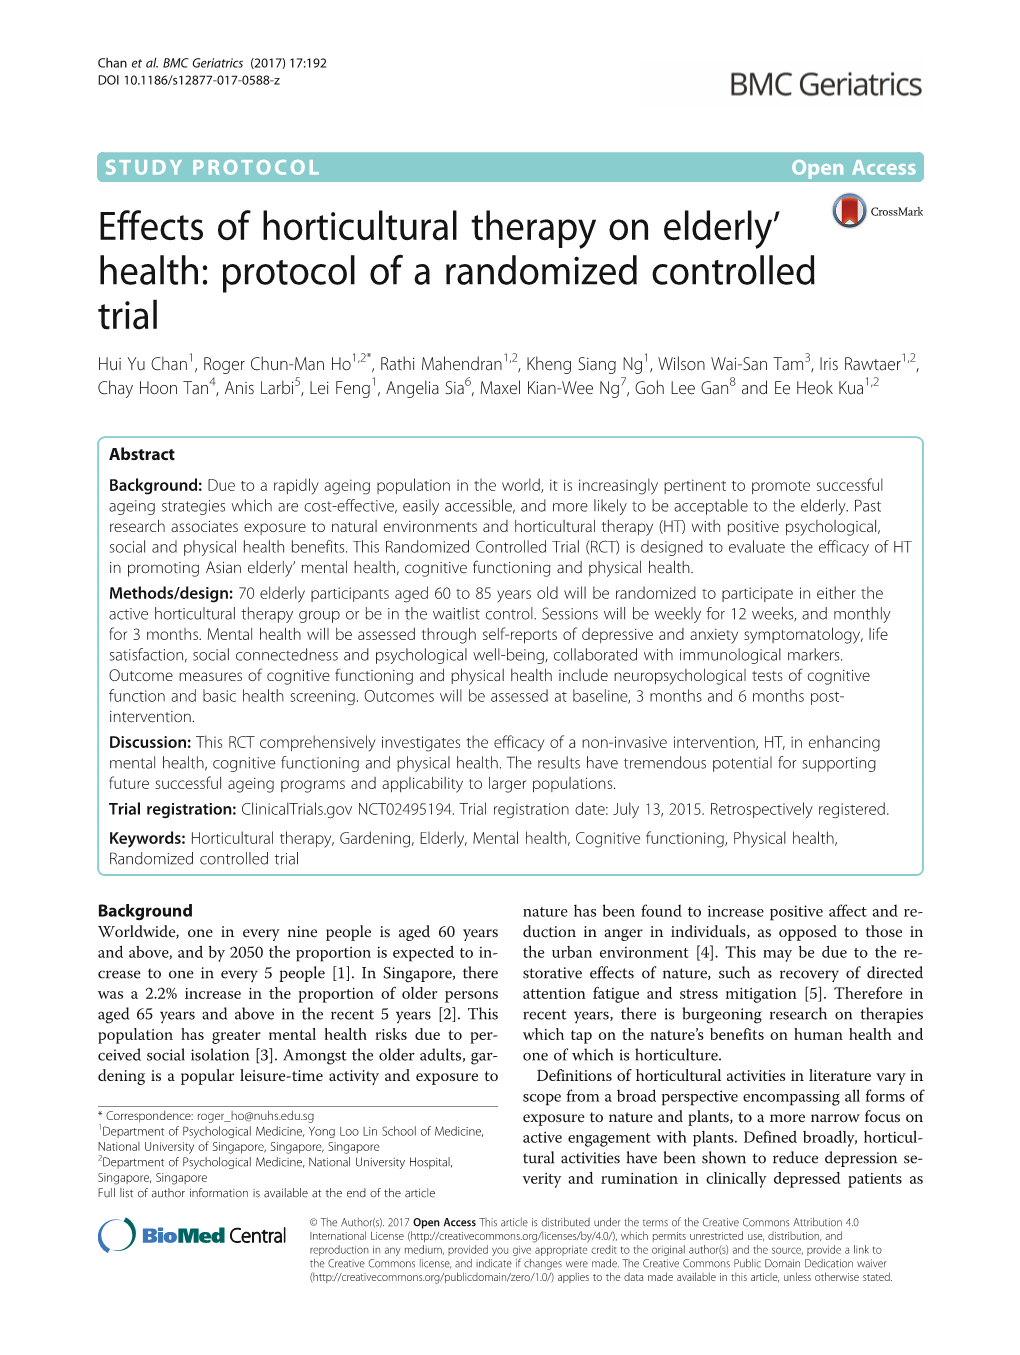 Effects of Horticultural Therapy on Elderly' Health